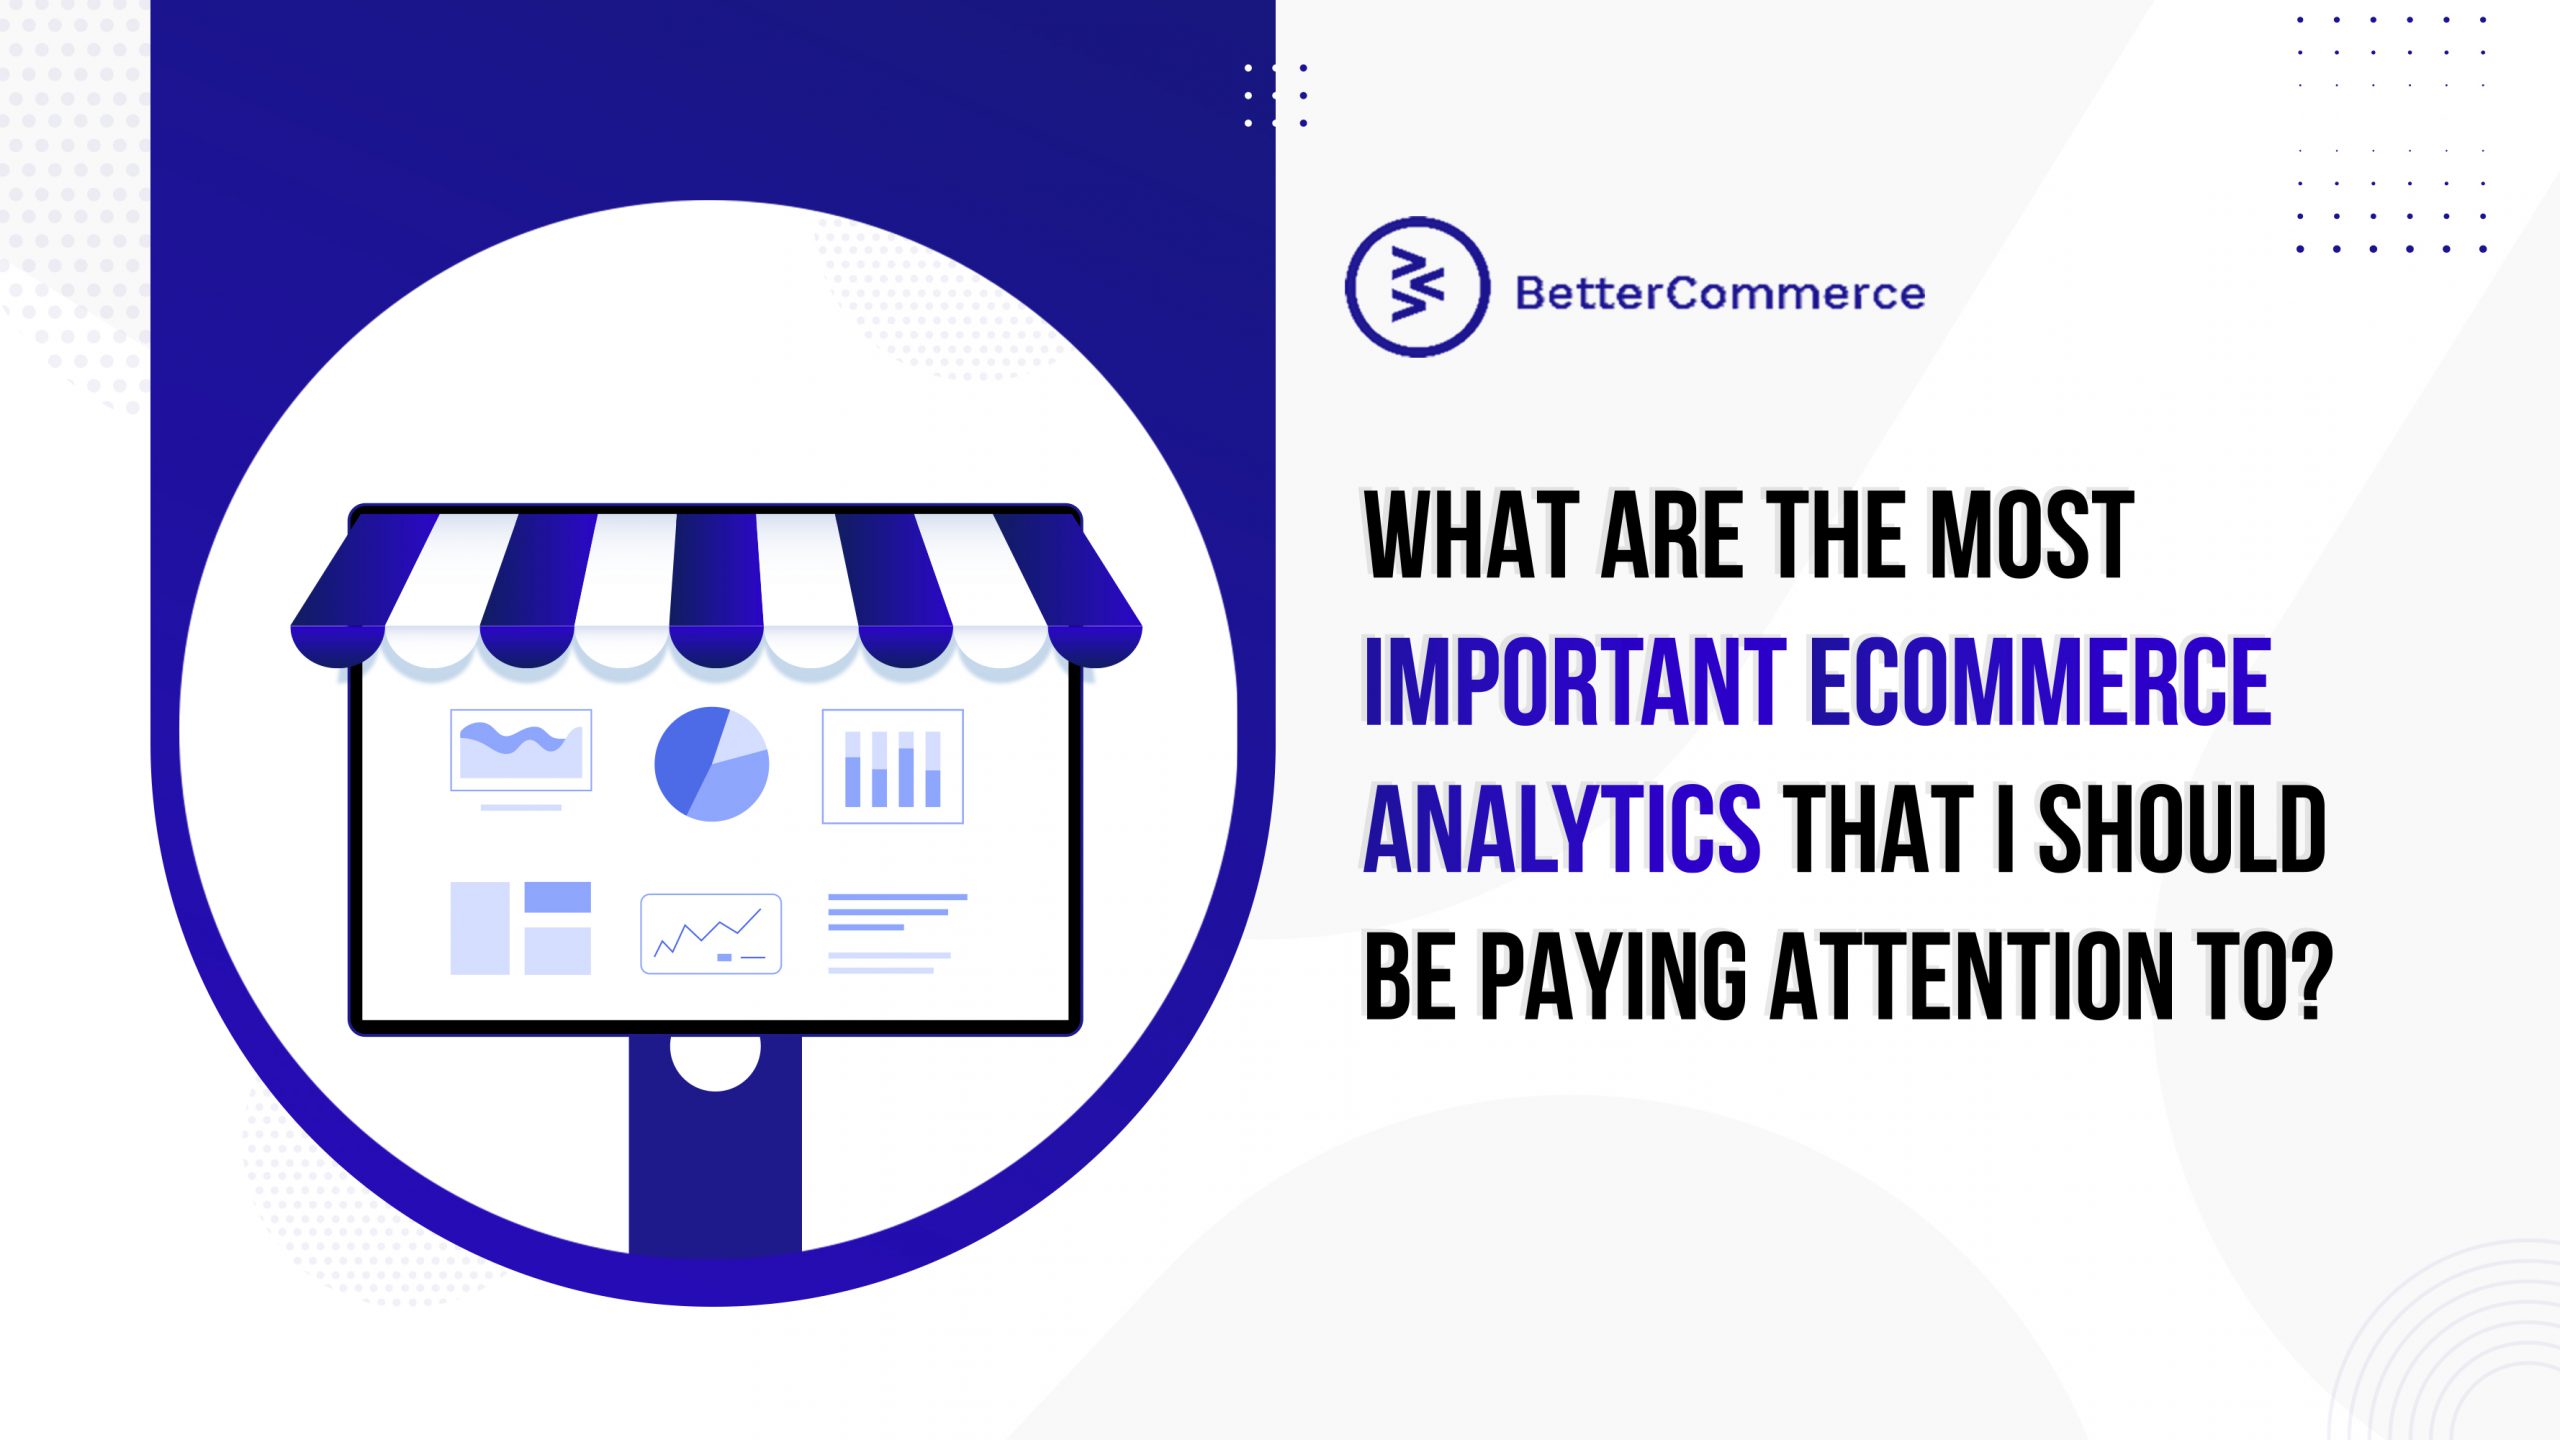 What are the most important eCommerce analytics that I should be paying attention to?